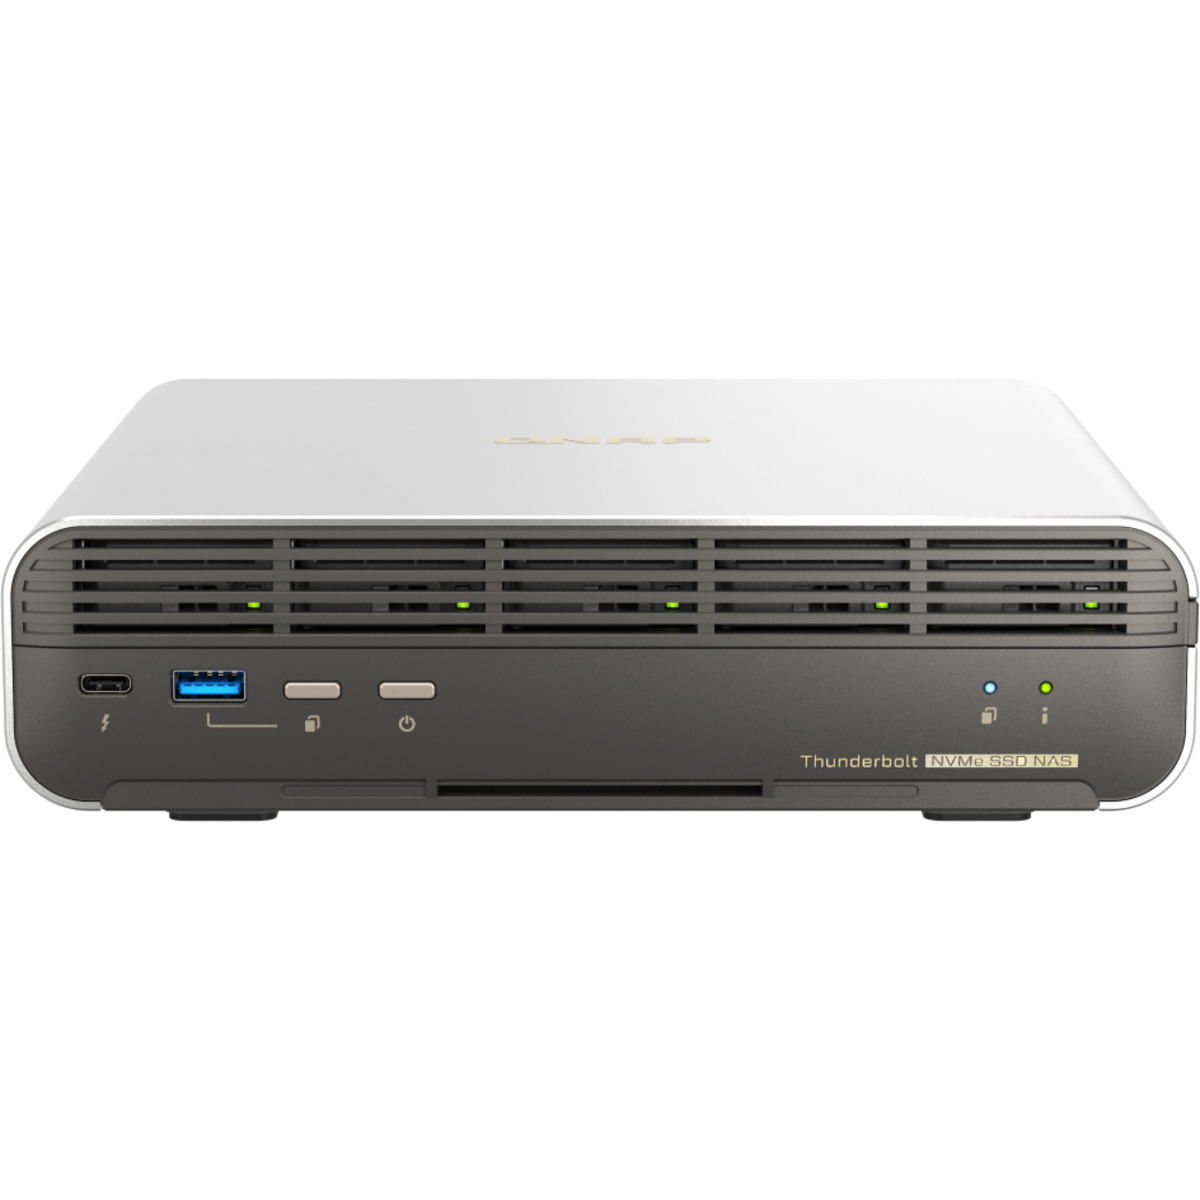 QNAP TBS-h574TX Core i5 Thunderbolt 4 5tb 5-Bay Desktop Multimedia / Power User / Business DAS-NAS - Combo Direct + Network Storage Device 5x1tb Sandisk Plus Series SDSSDA3N-1T00  3200/2500MB/s M.2 2280 NVMe SSD CONSUMER Class Drives Installed - Burn-In Tested TBS-h574TX Core i5 Thunderbolt 4